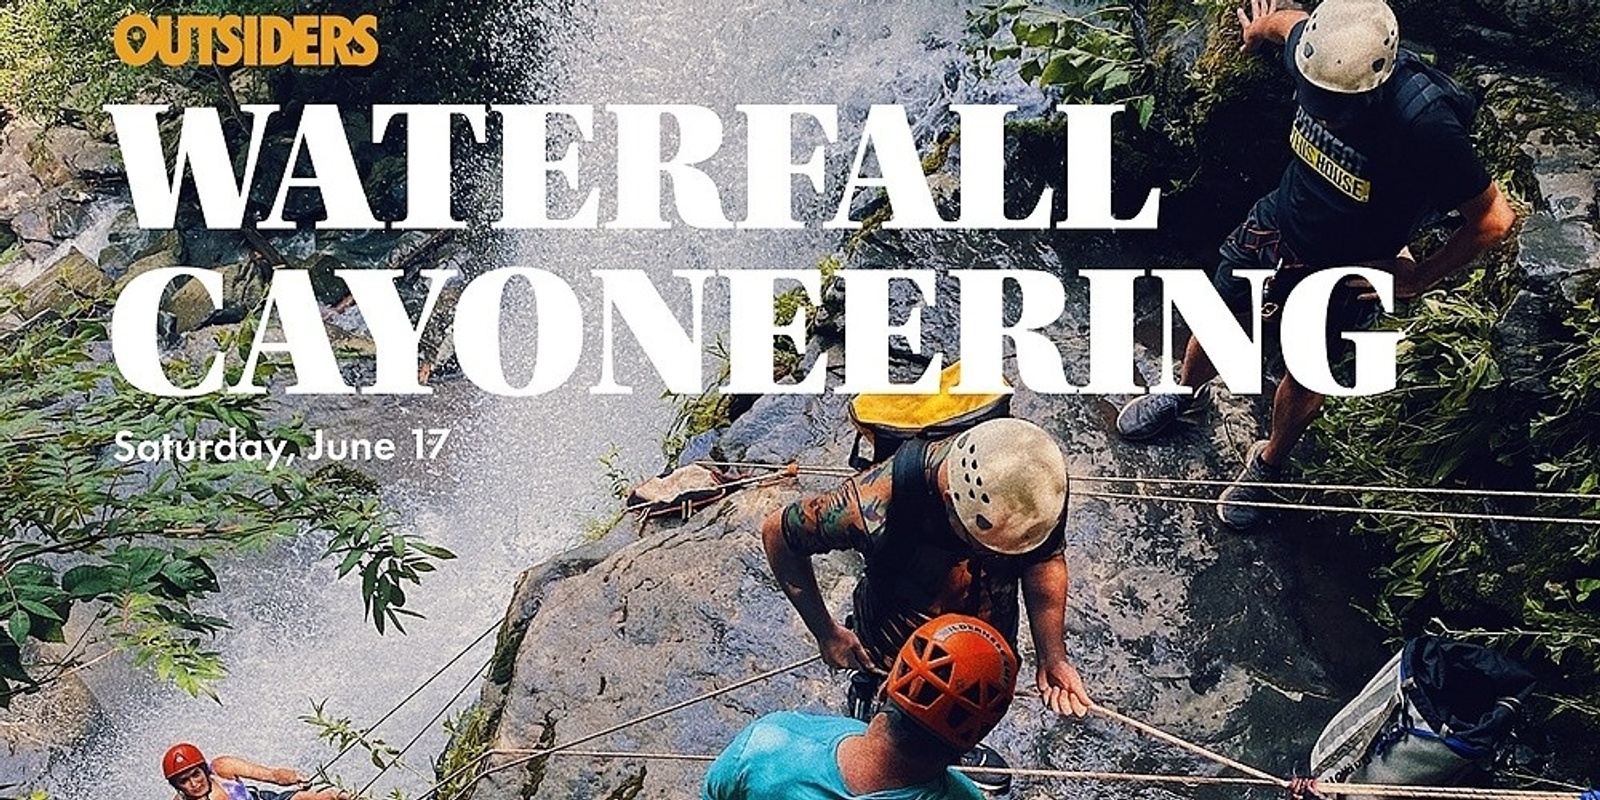 Banner image for Waterfall Canyoneering Adventure CHI